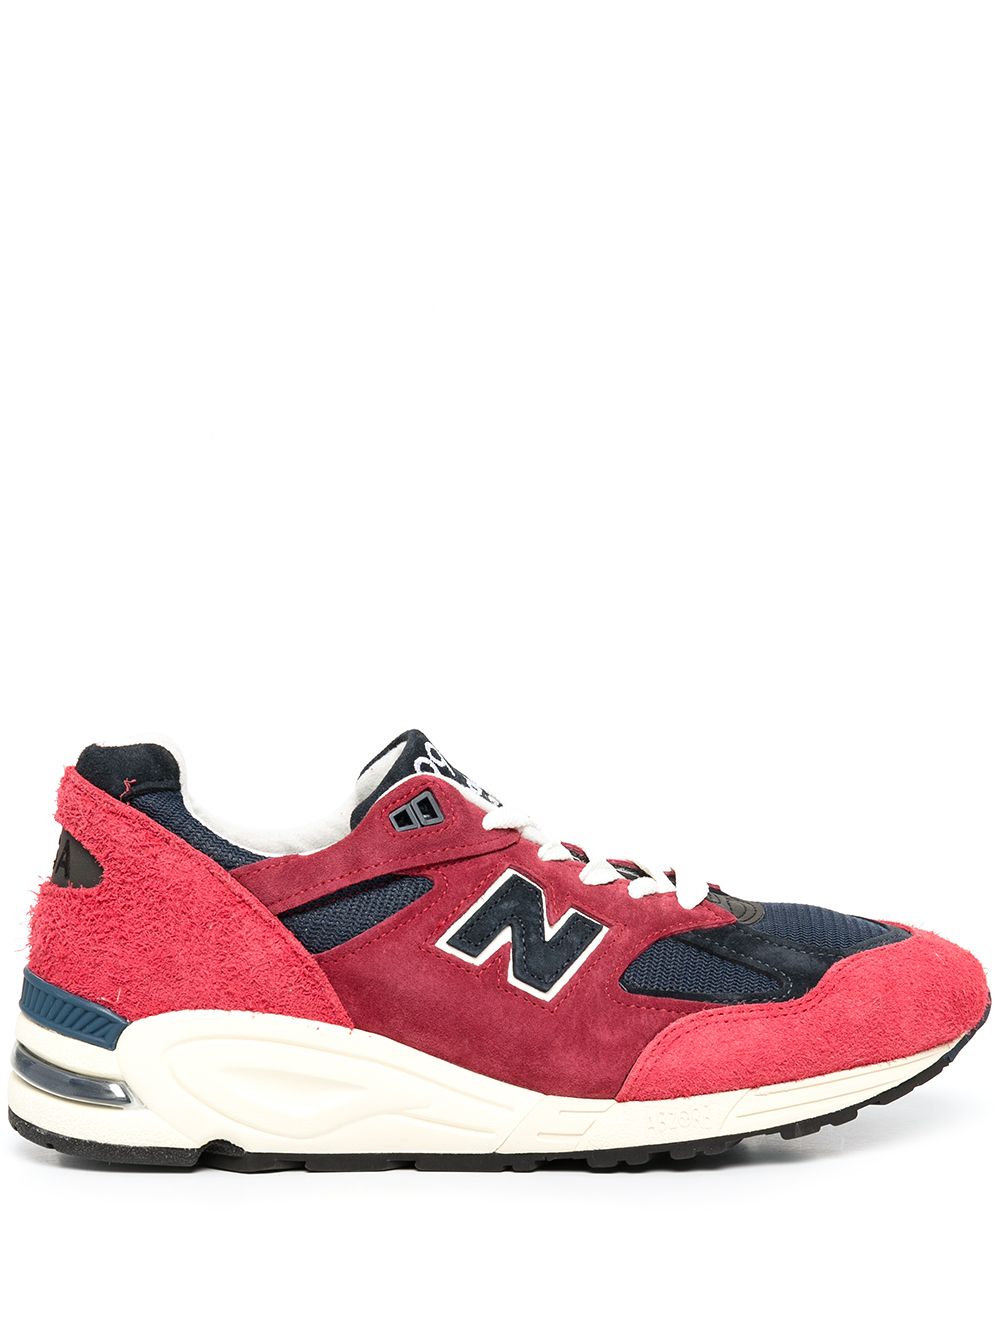 New Balance Made-in-USA 990v2 sneakers - Red